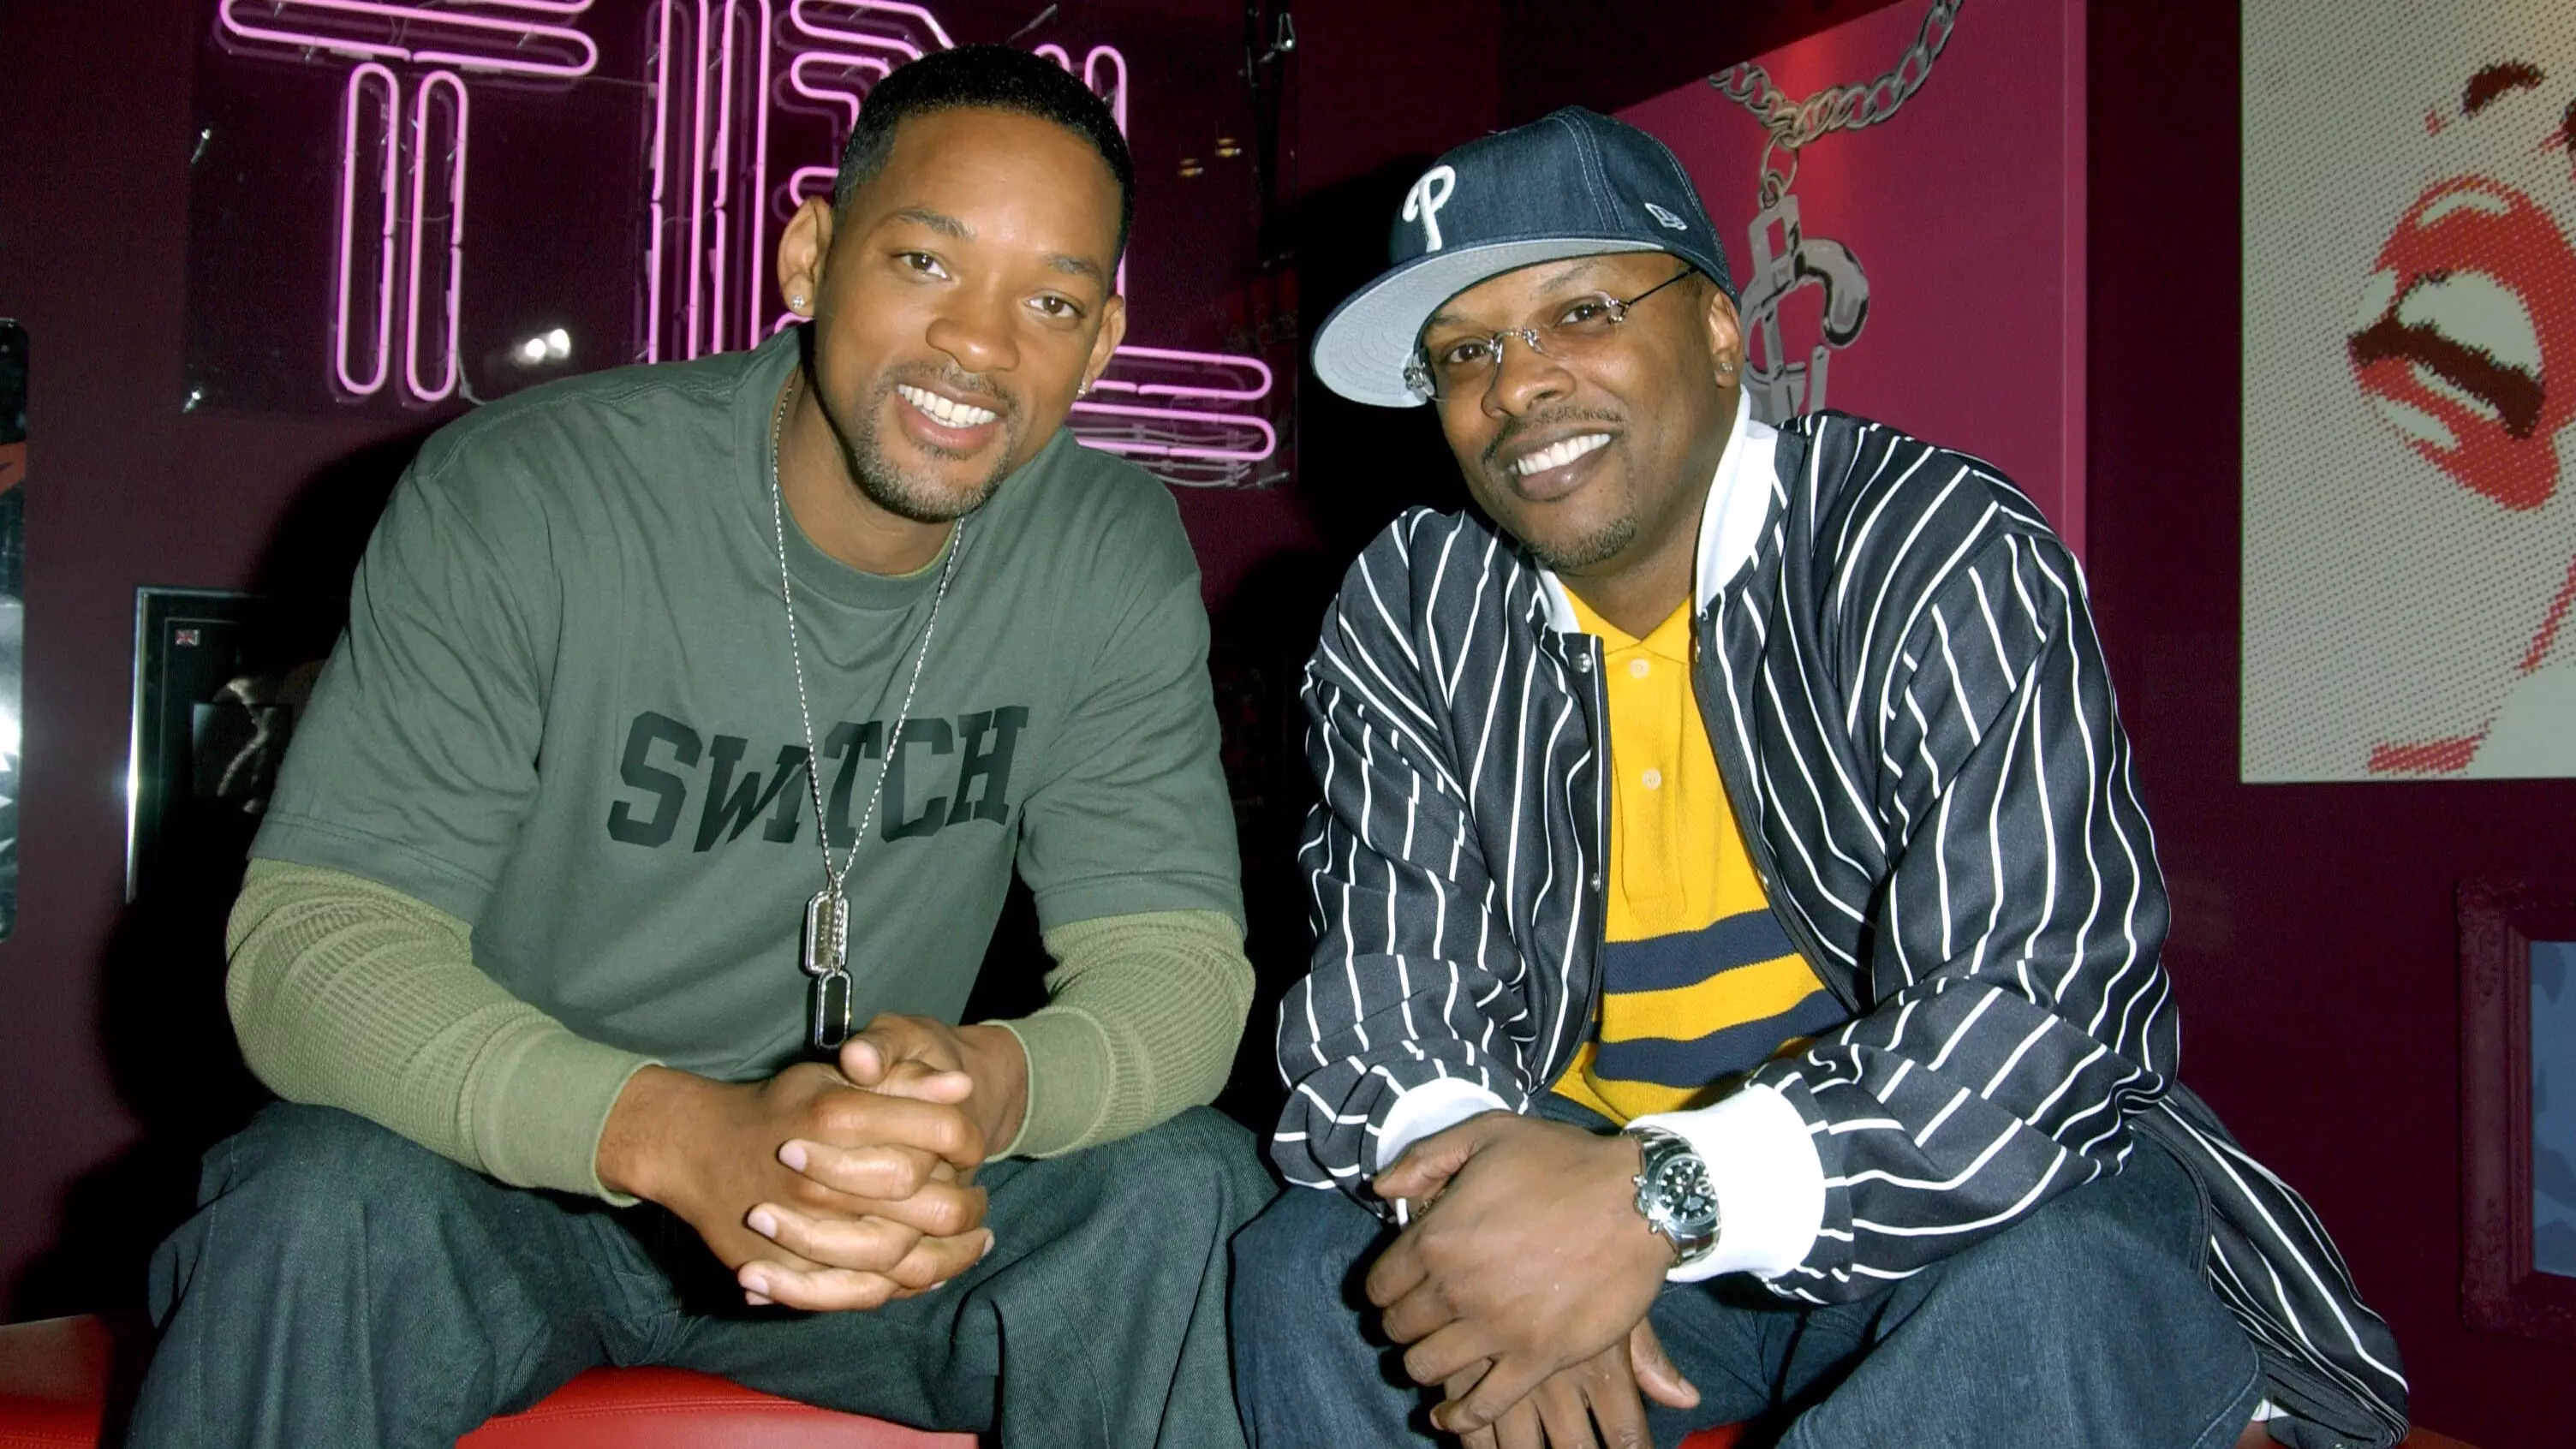 Shake The Room! Will Smith And Jazzy Jeff Are Making The Summertime So Much Better With UK Appearance